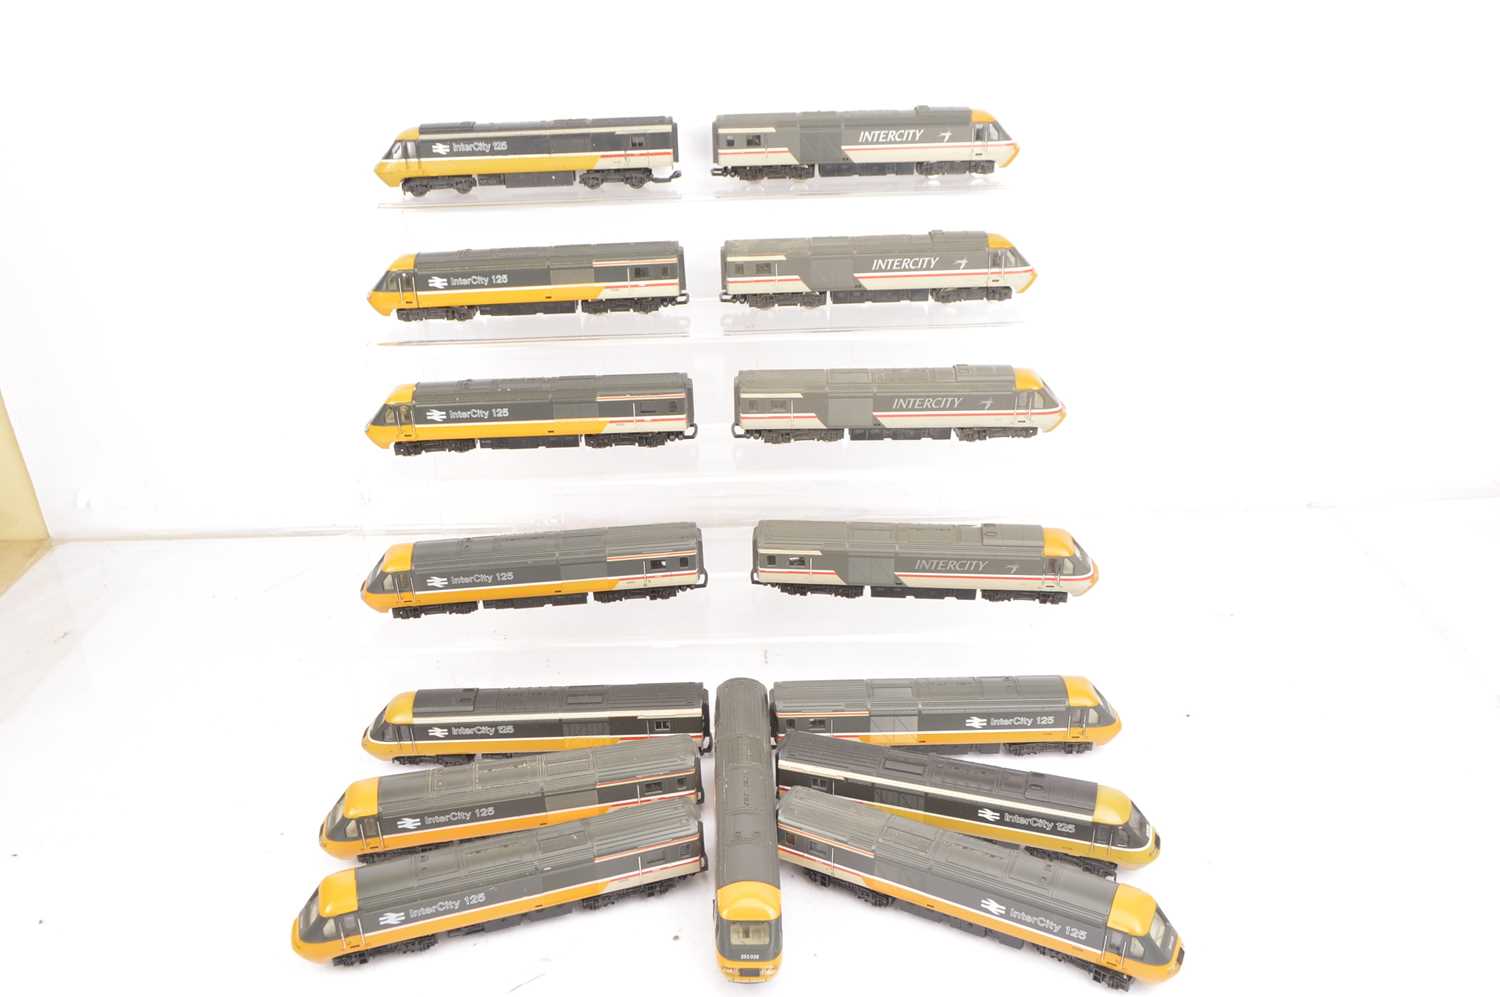 Lot 82 - Hornby 00 gauge HST Diesel  Locomotives and driving trailers in InterCity livery (15)